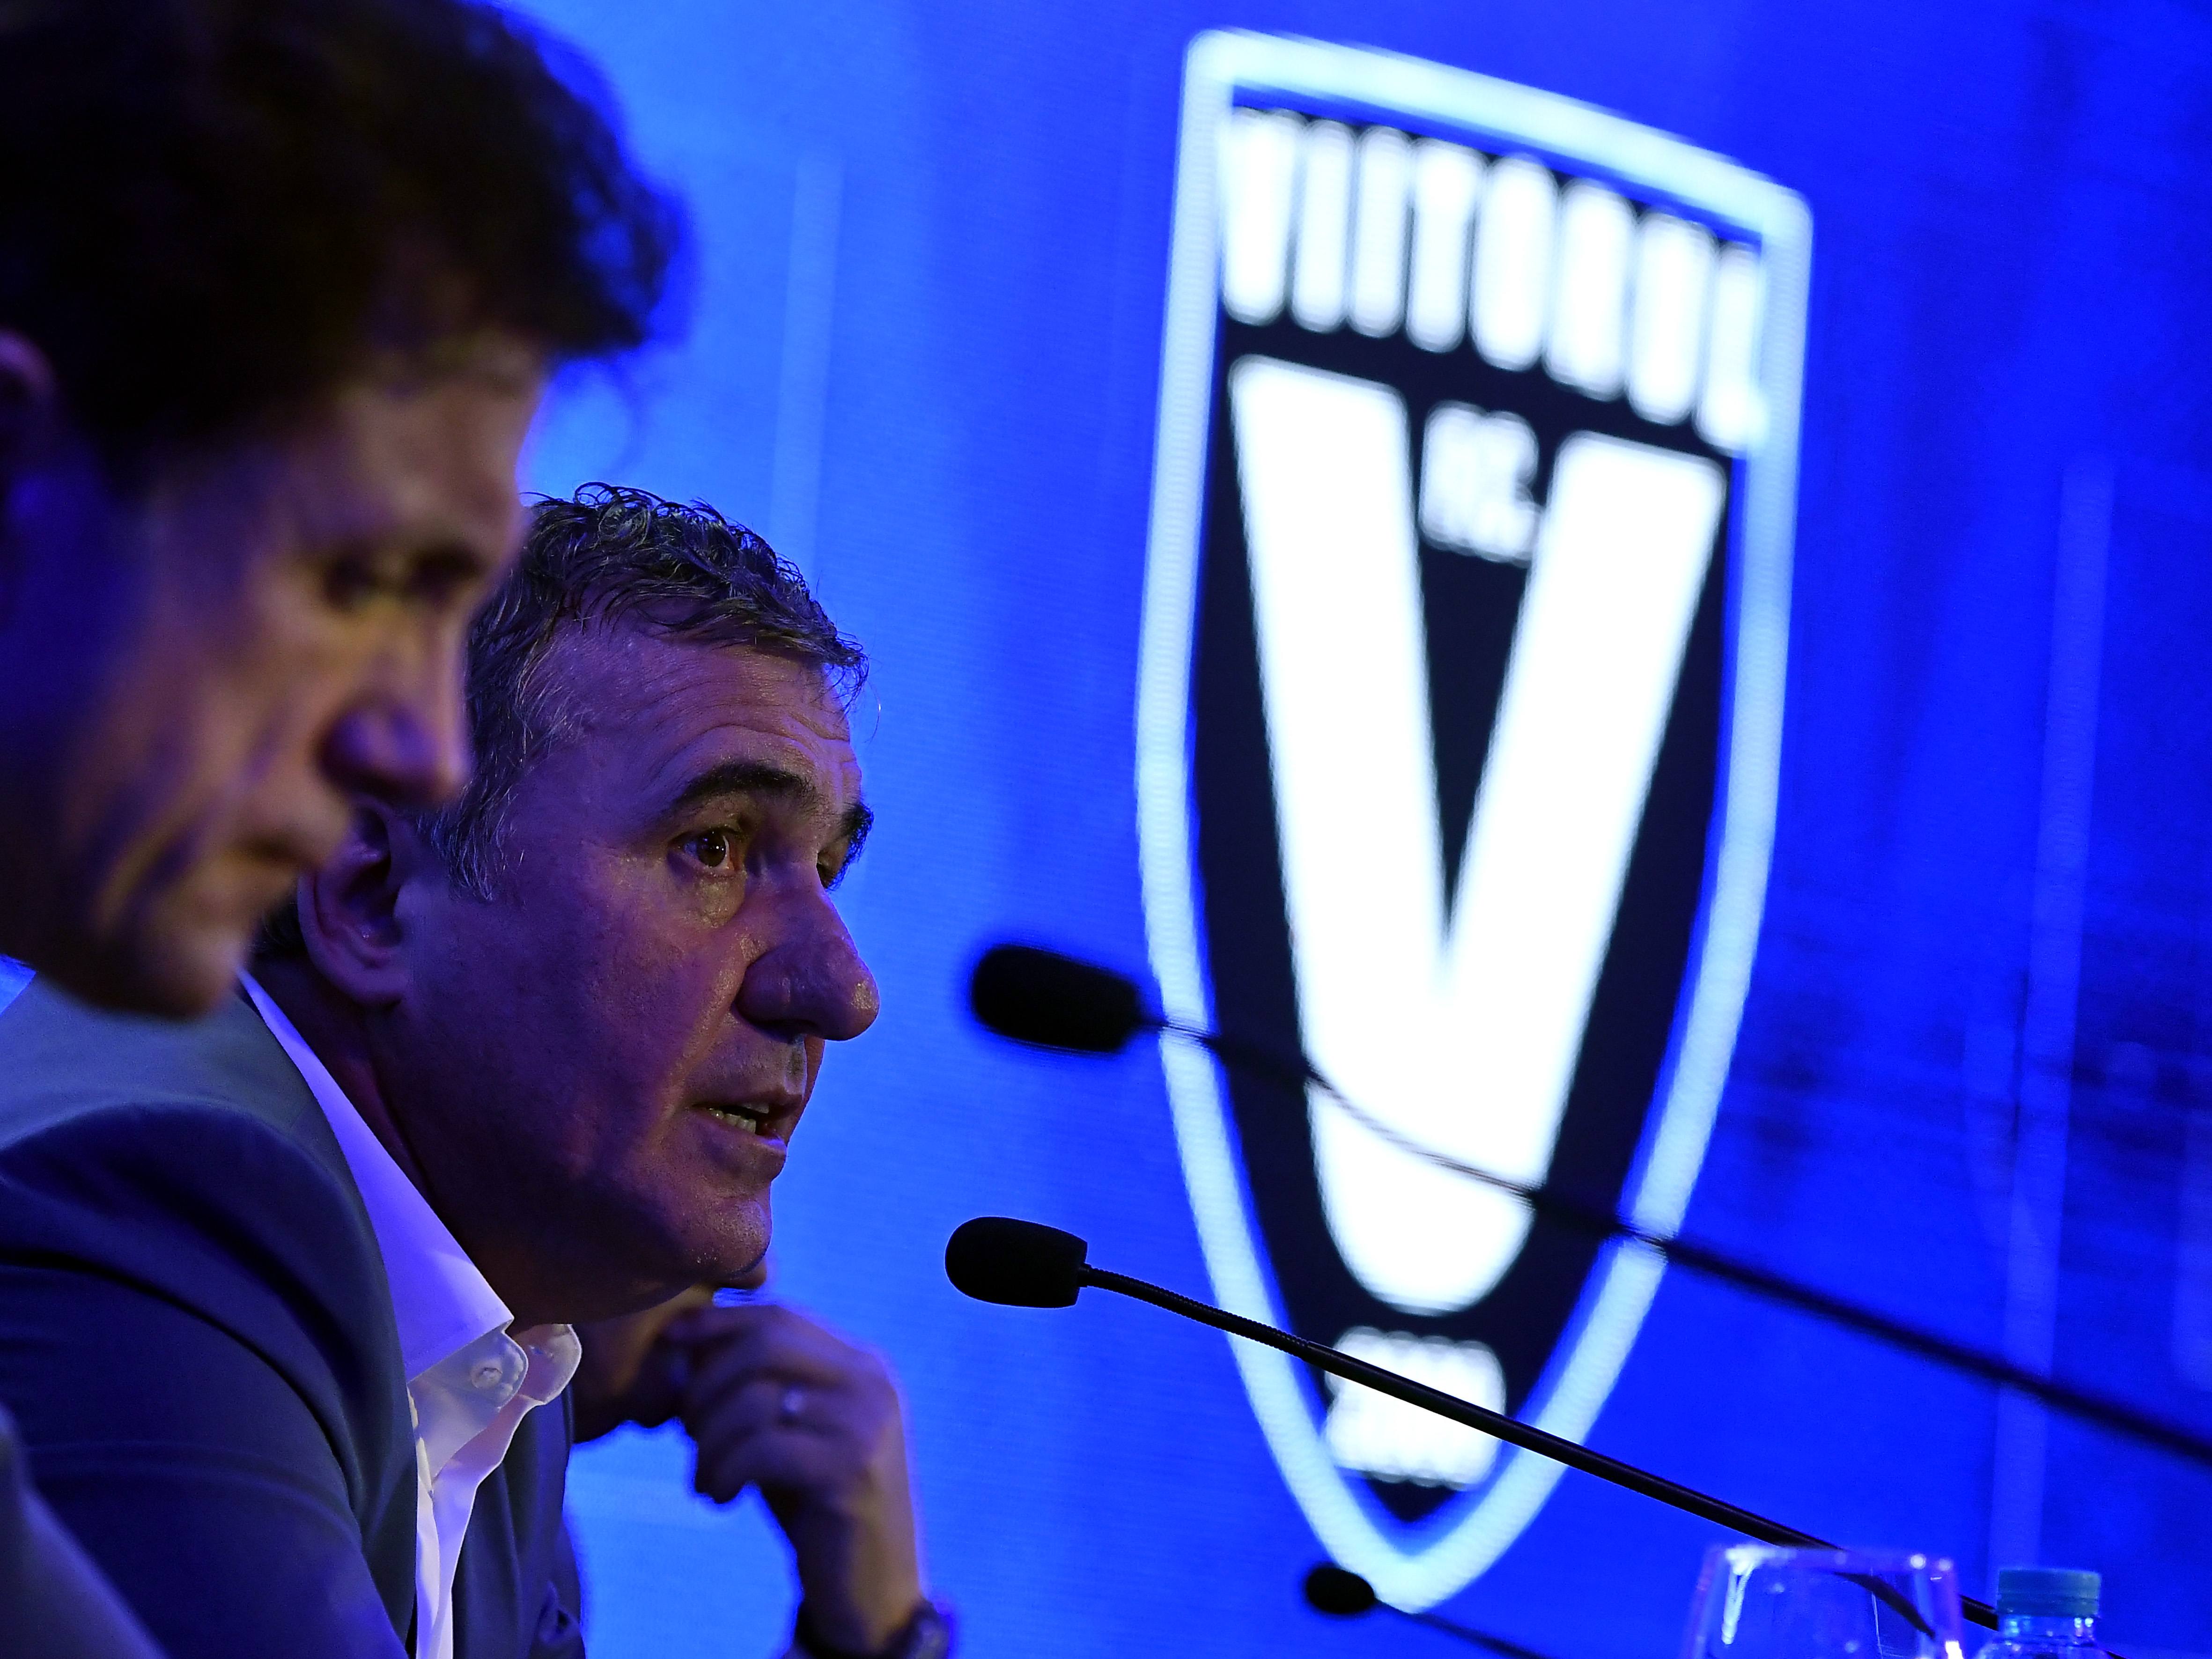 Hagi at the launch of his book "Champions create Champions" in 2019 (Photo: fcviitorul.ro)